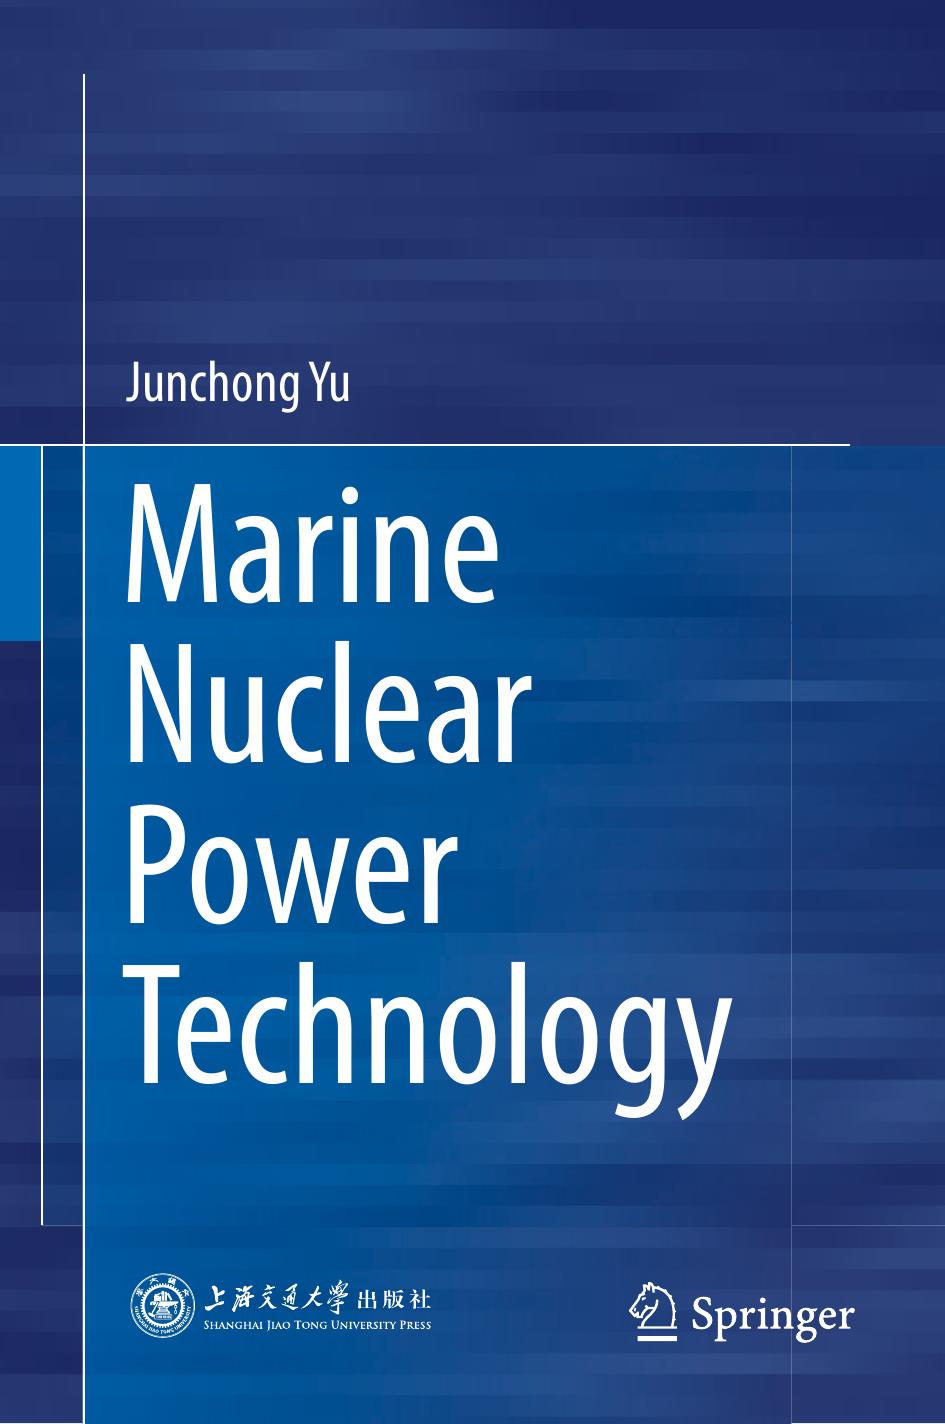 Marine Nuclear Power Technology by Junchong Yu